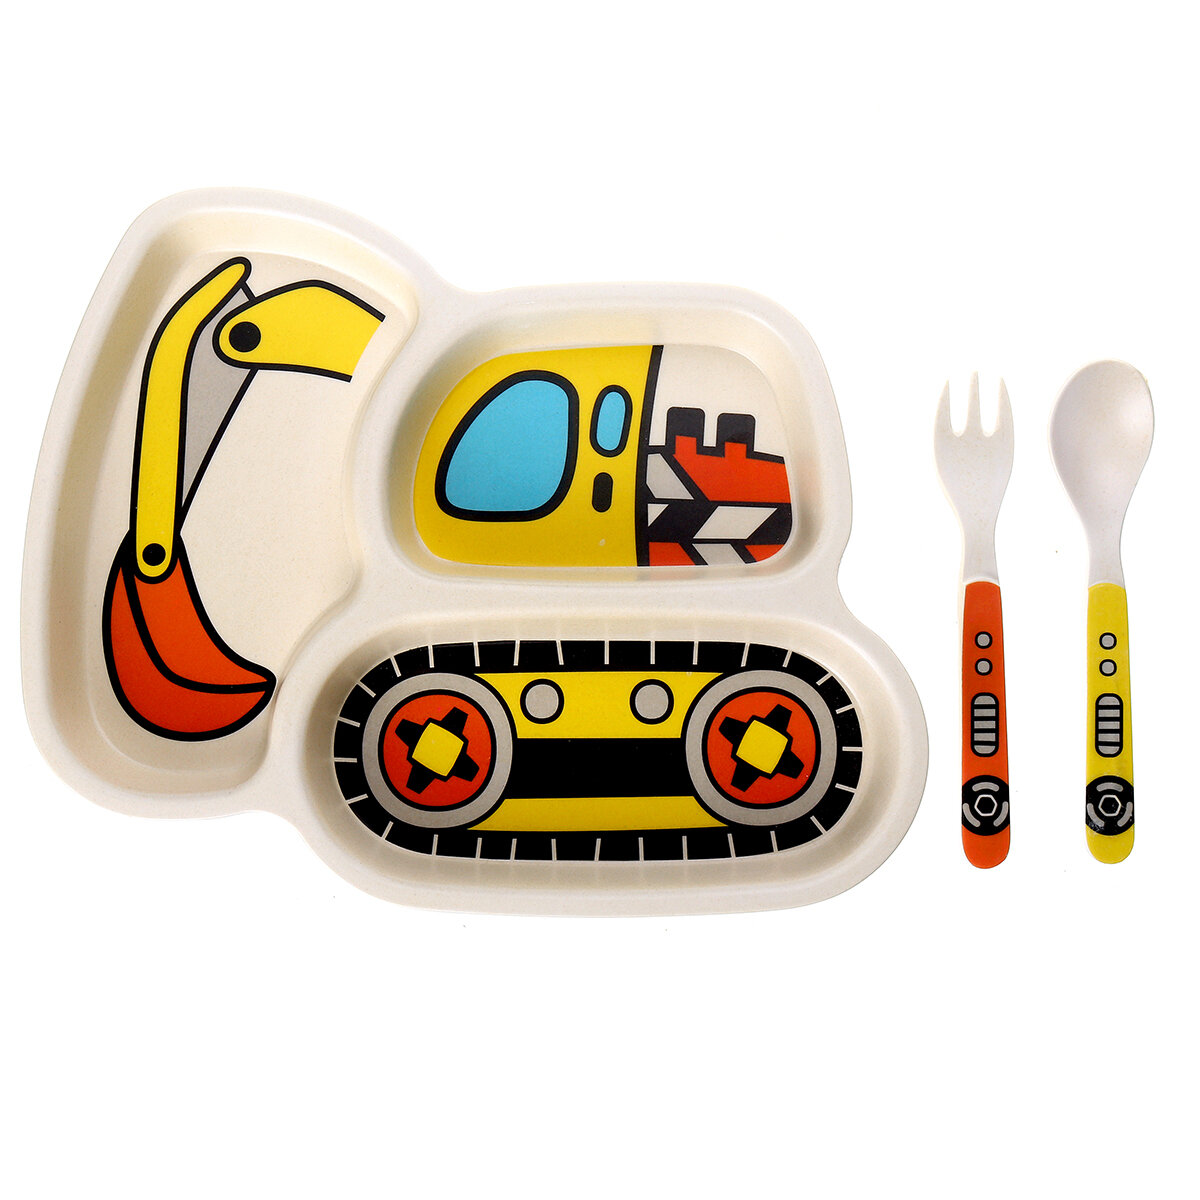 3Pcs Children`s Tableware Plate Spoon Fork Set Non-Toxic Plastic Vehicle Theme Dinner Plate For Chil